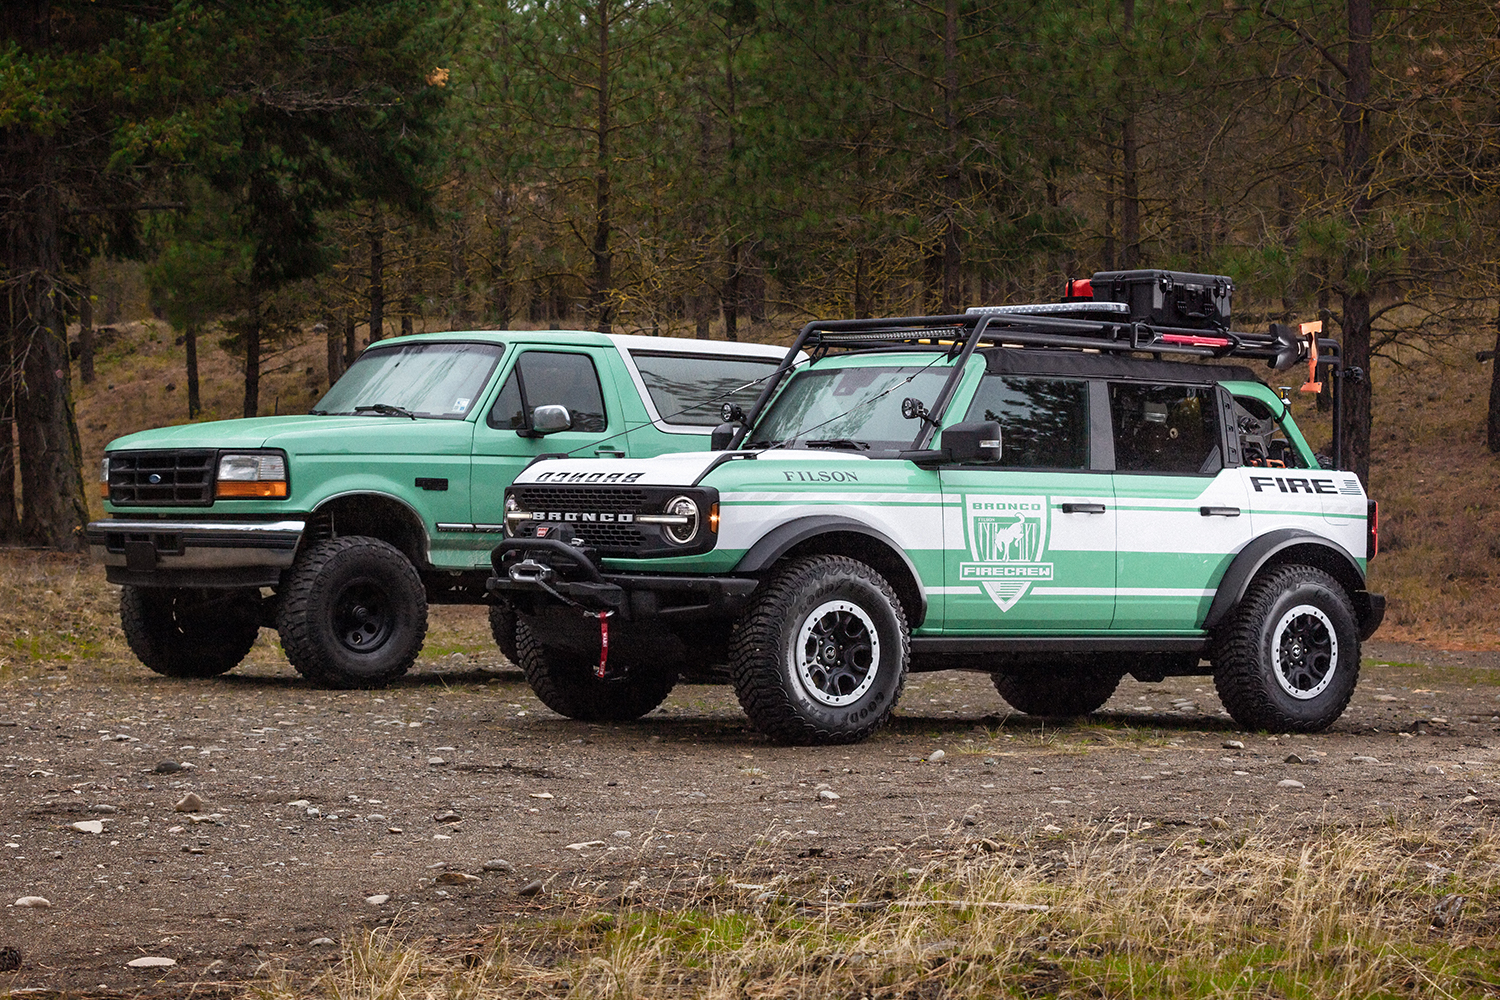 Filson Ford Bronco Wildland Fire Rig concept vehicle